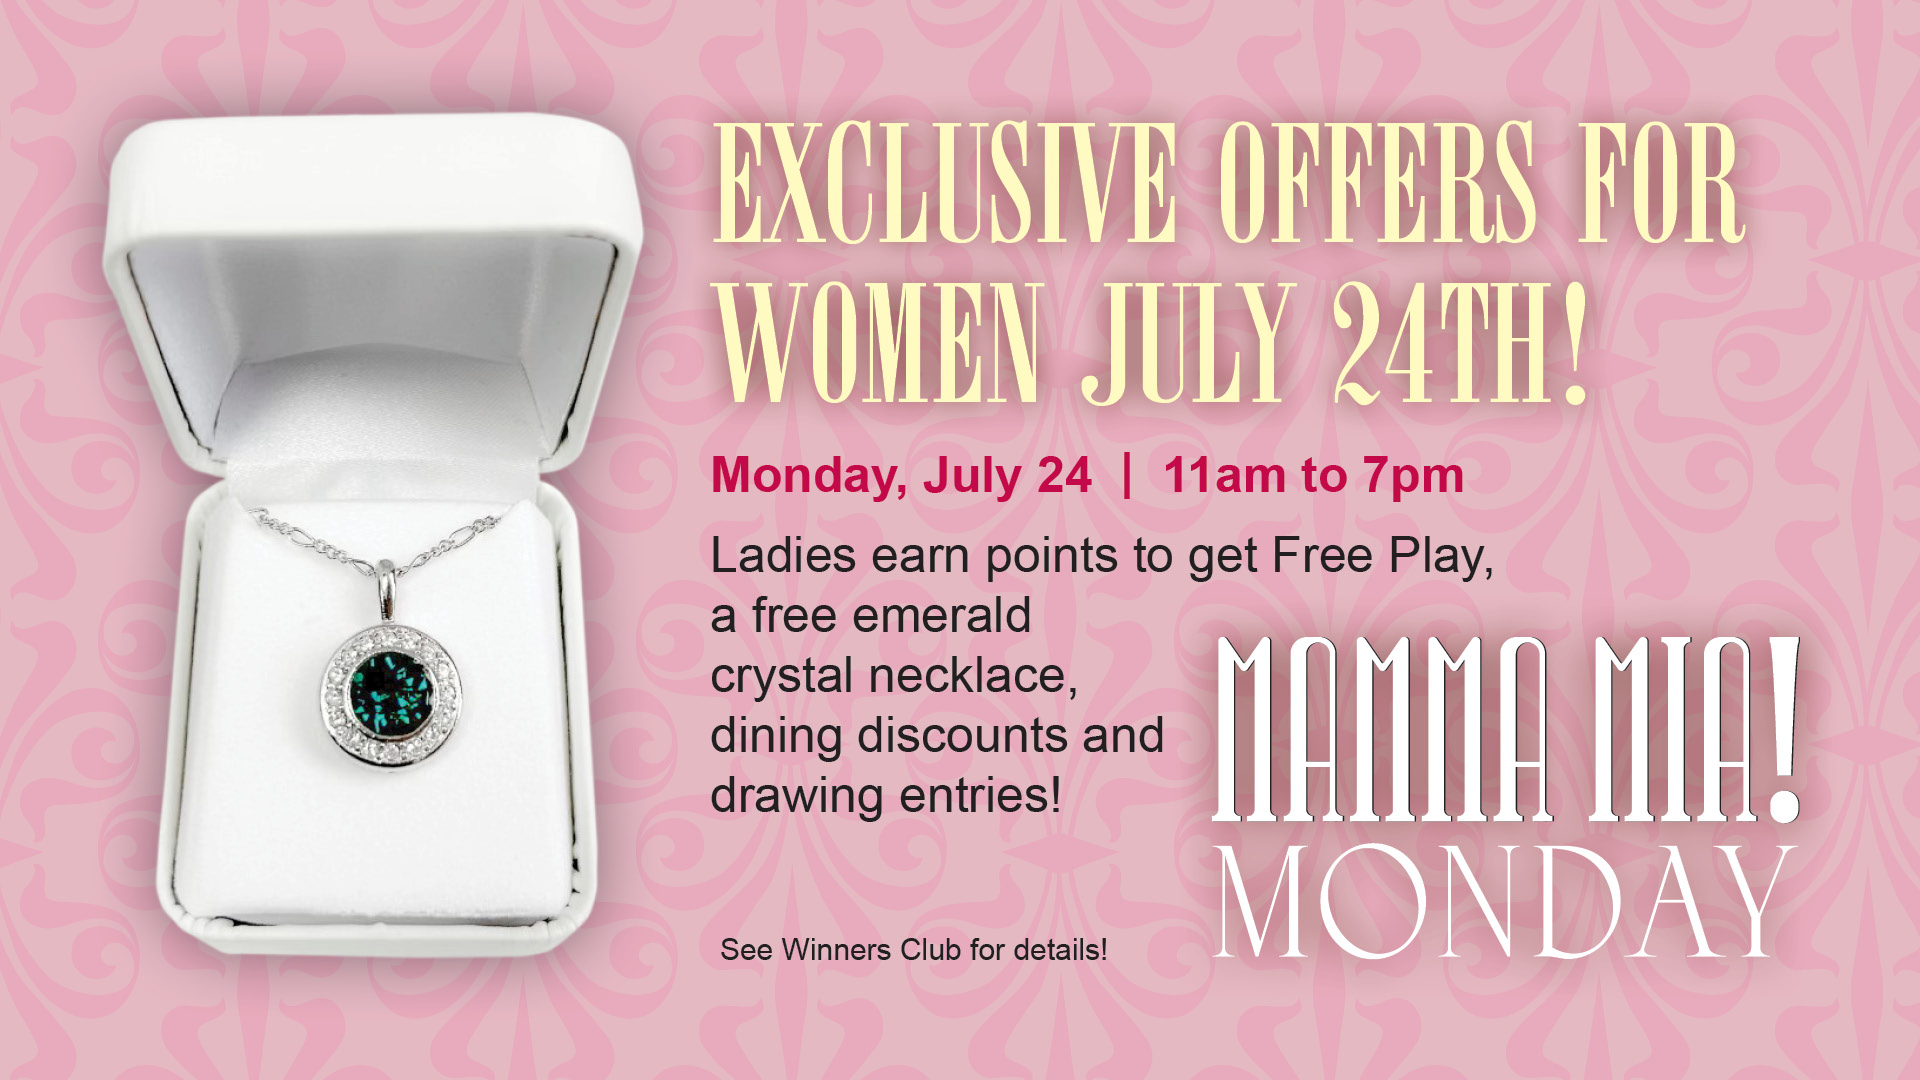 Free Emerald Crystal Necklace and More